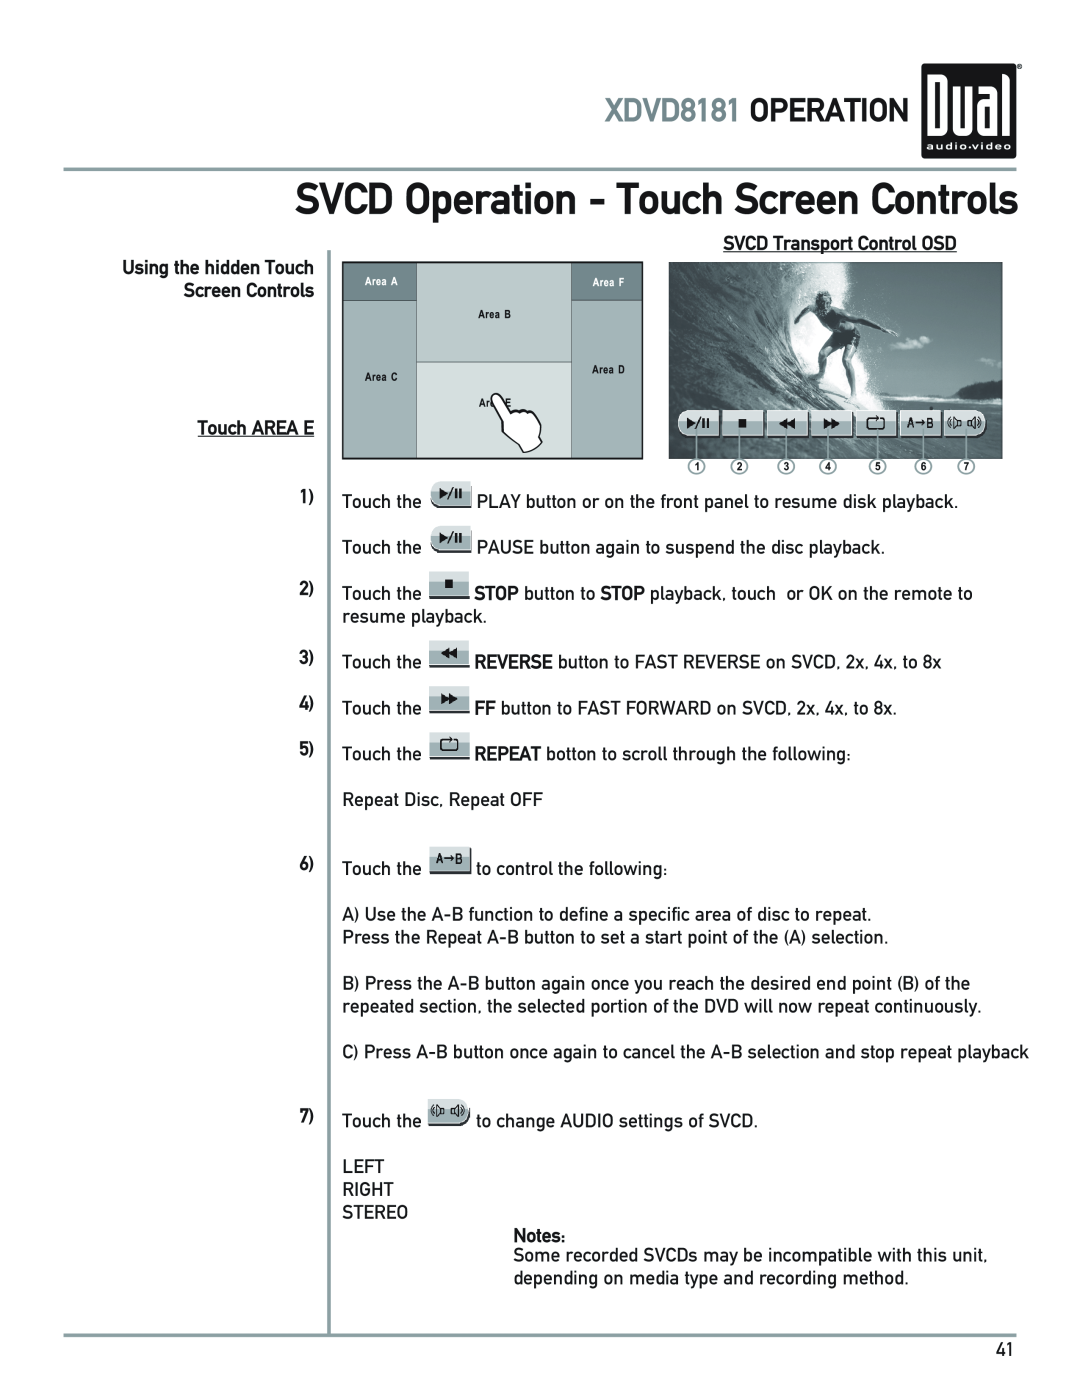 Dual owner manual SVCD Operation - Touch Screen Controls, XDVD8181 OPERATION, Touch AREA E 1, SVCD Transport Control OSD 